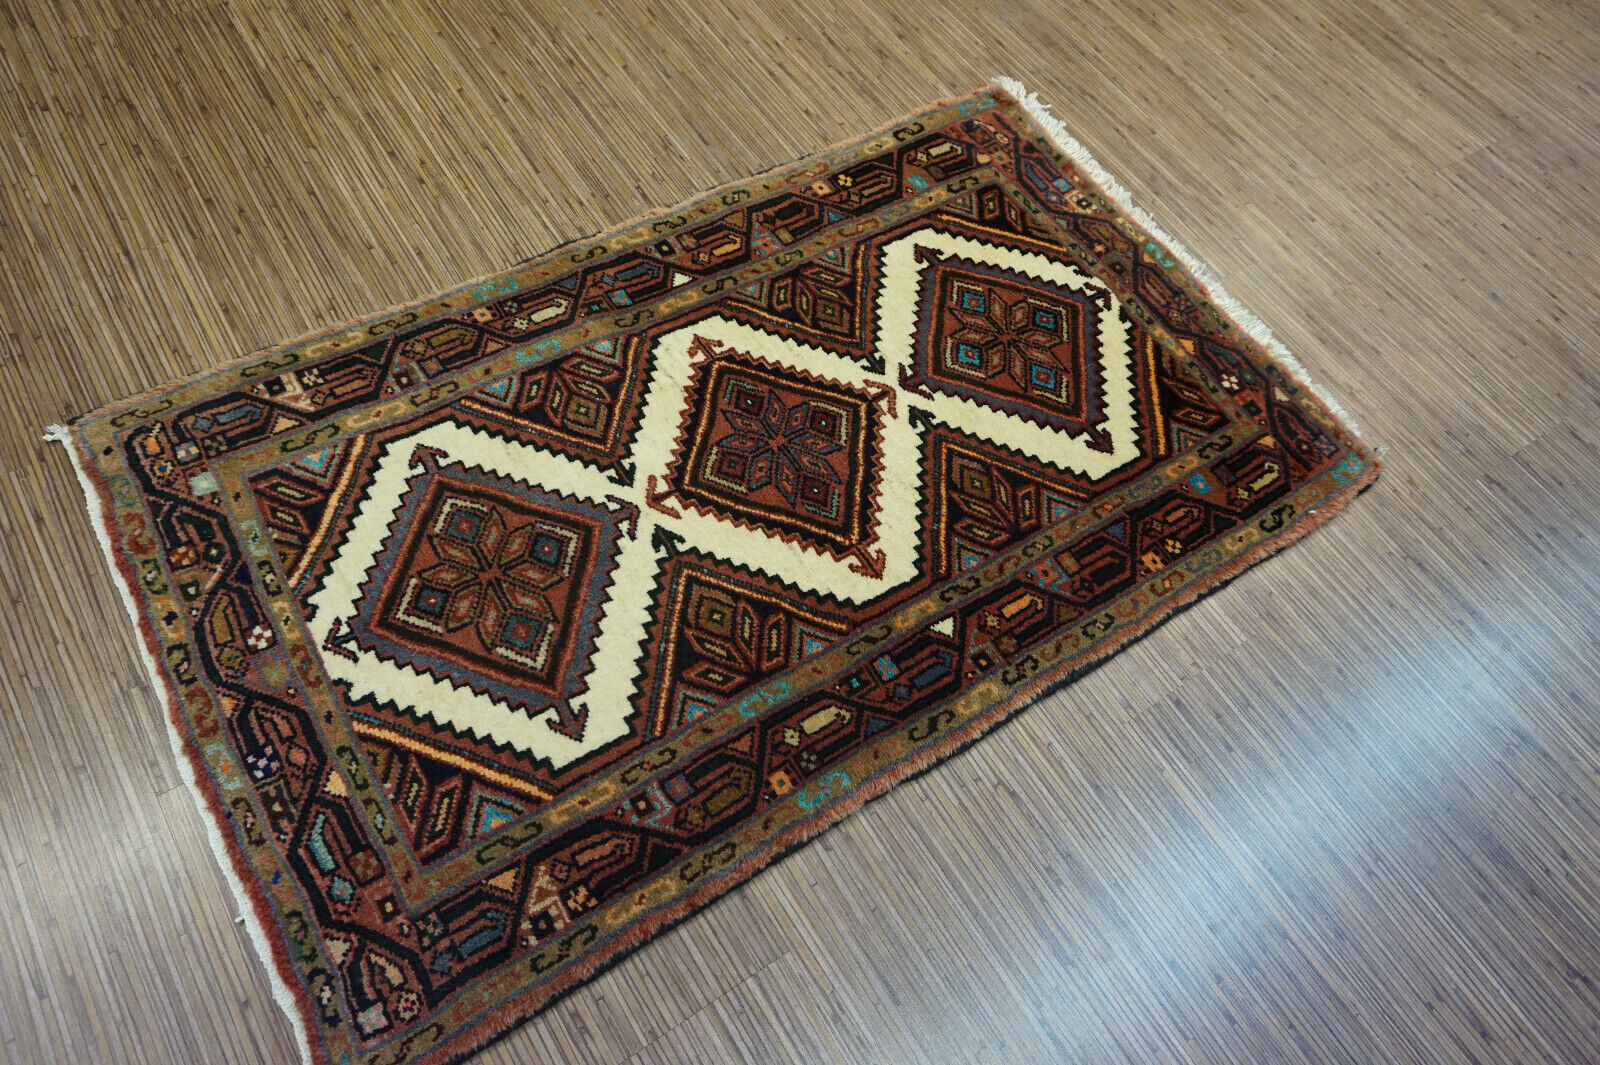 Cultural heritage reflected in the intricate patterns and symbols of the Persian Style Rug